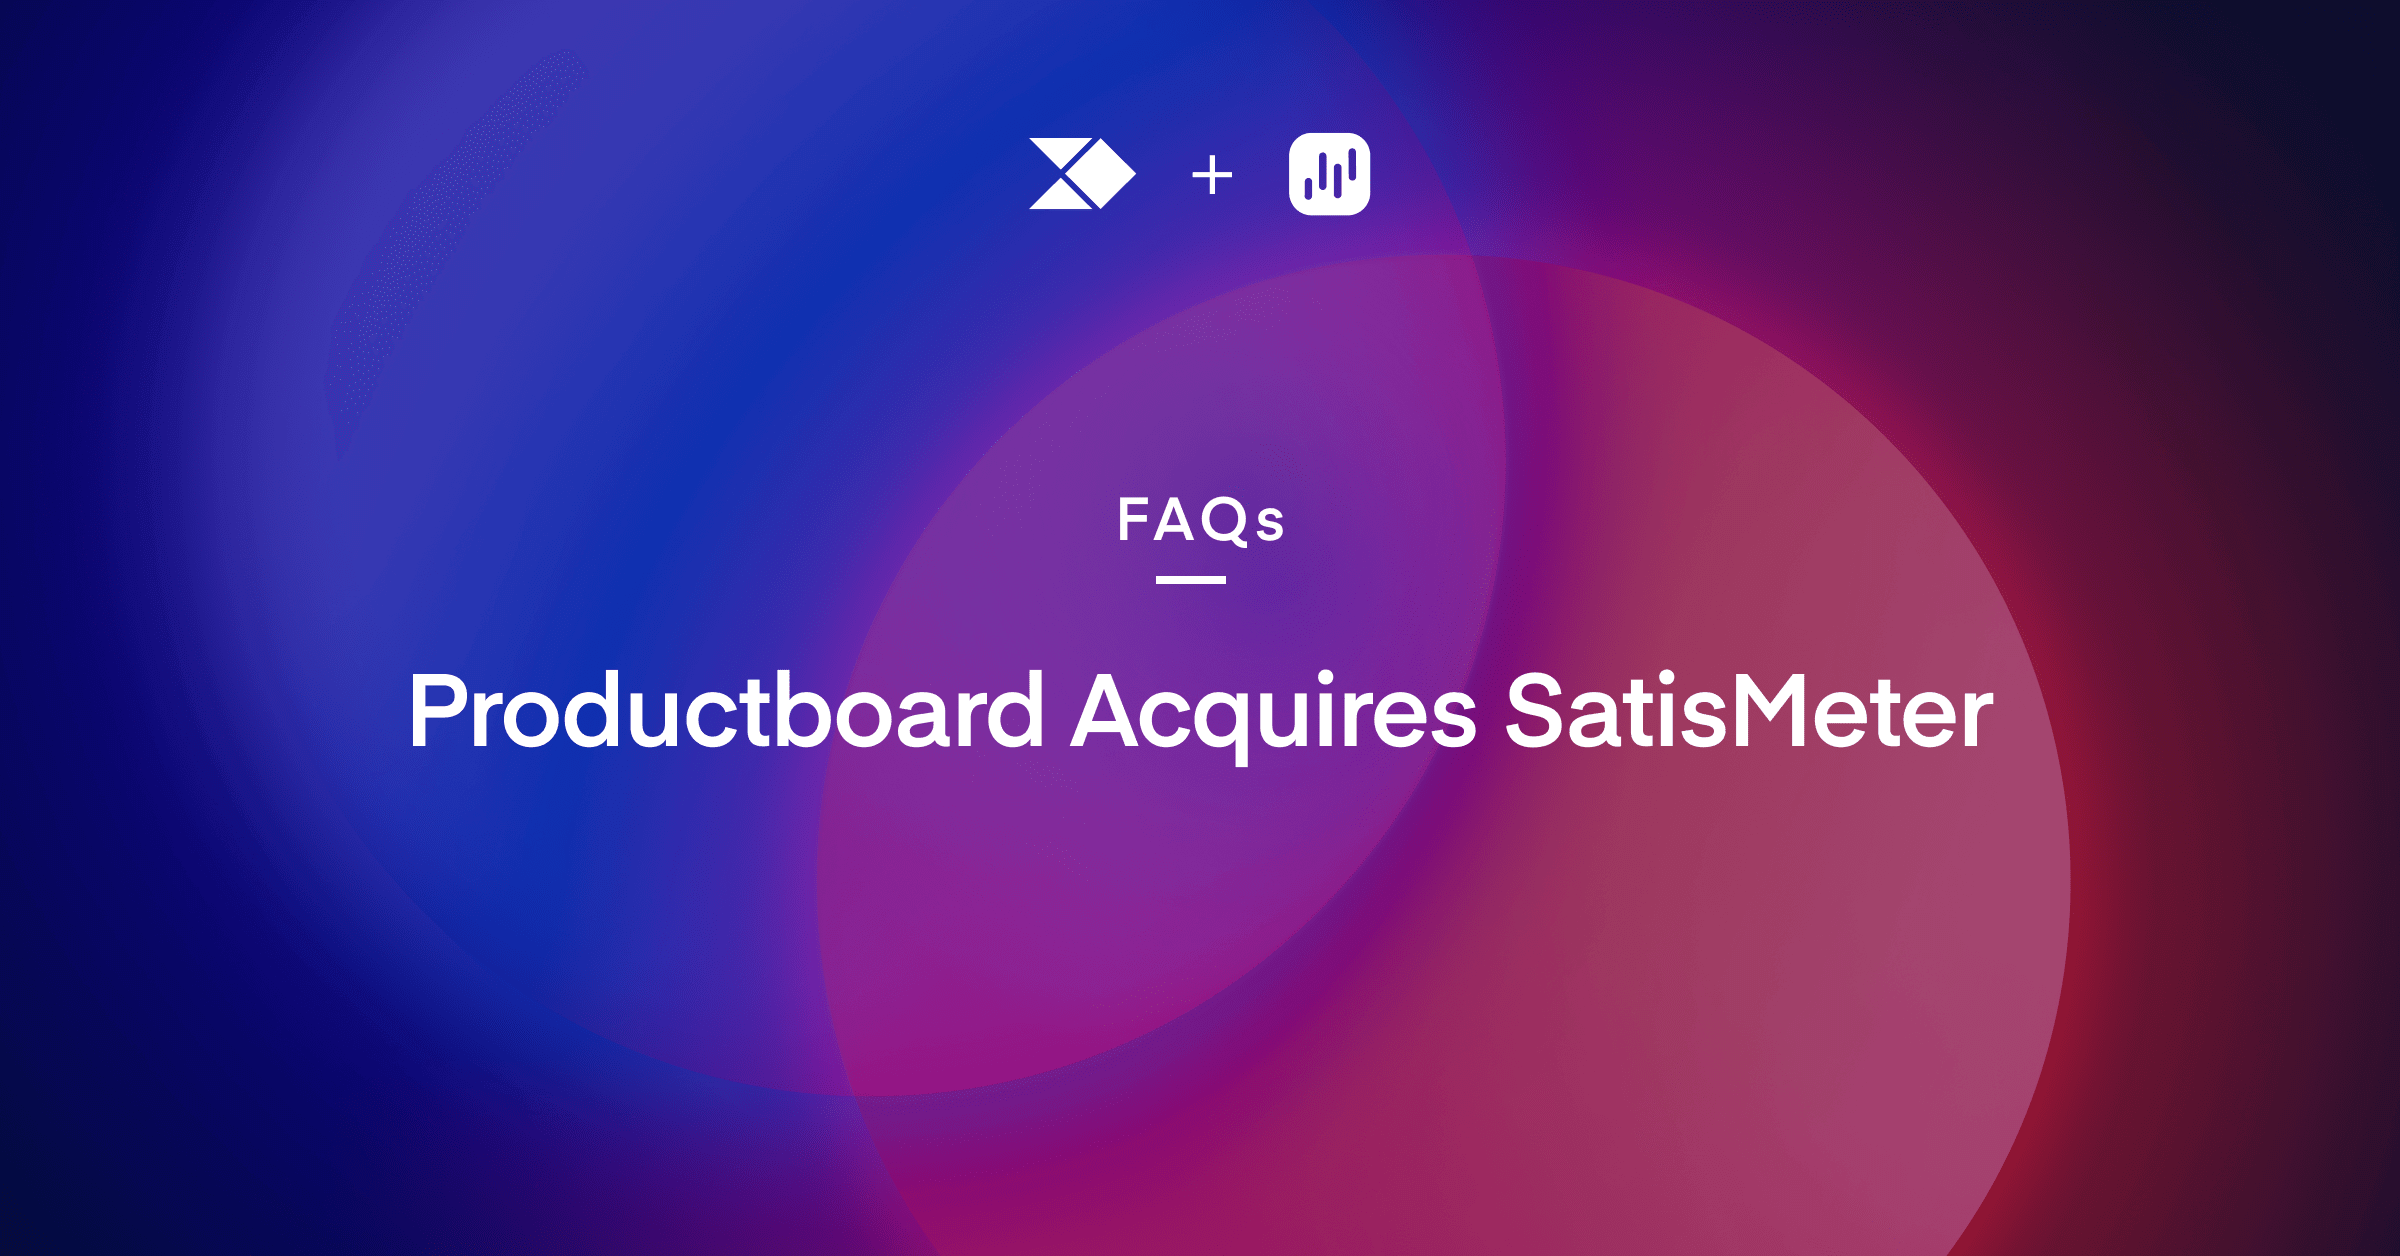 Productboard Acquires SatisMeter | FAQs